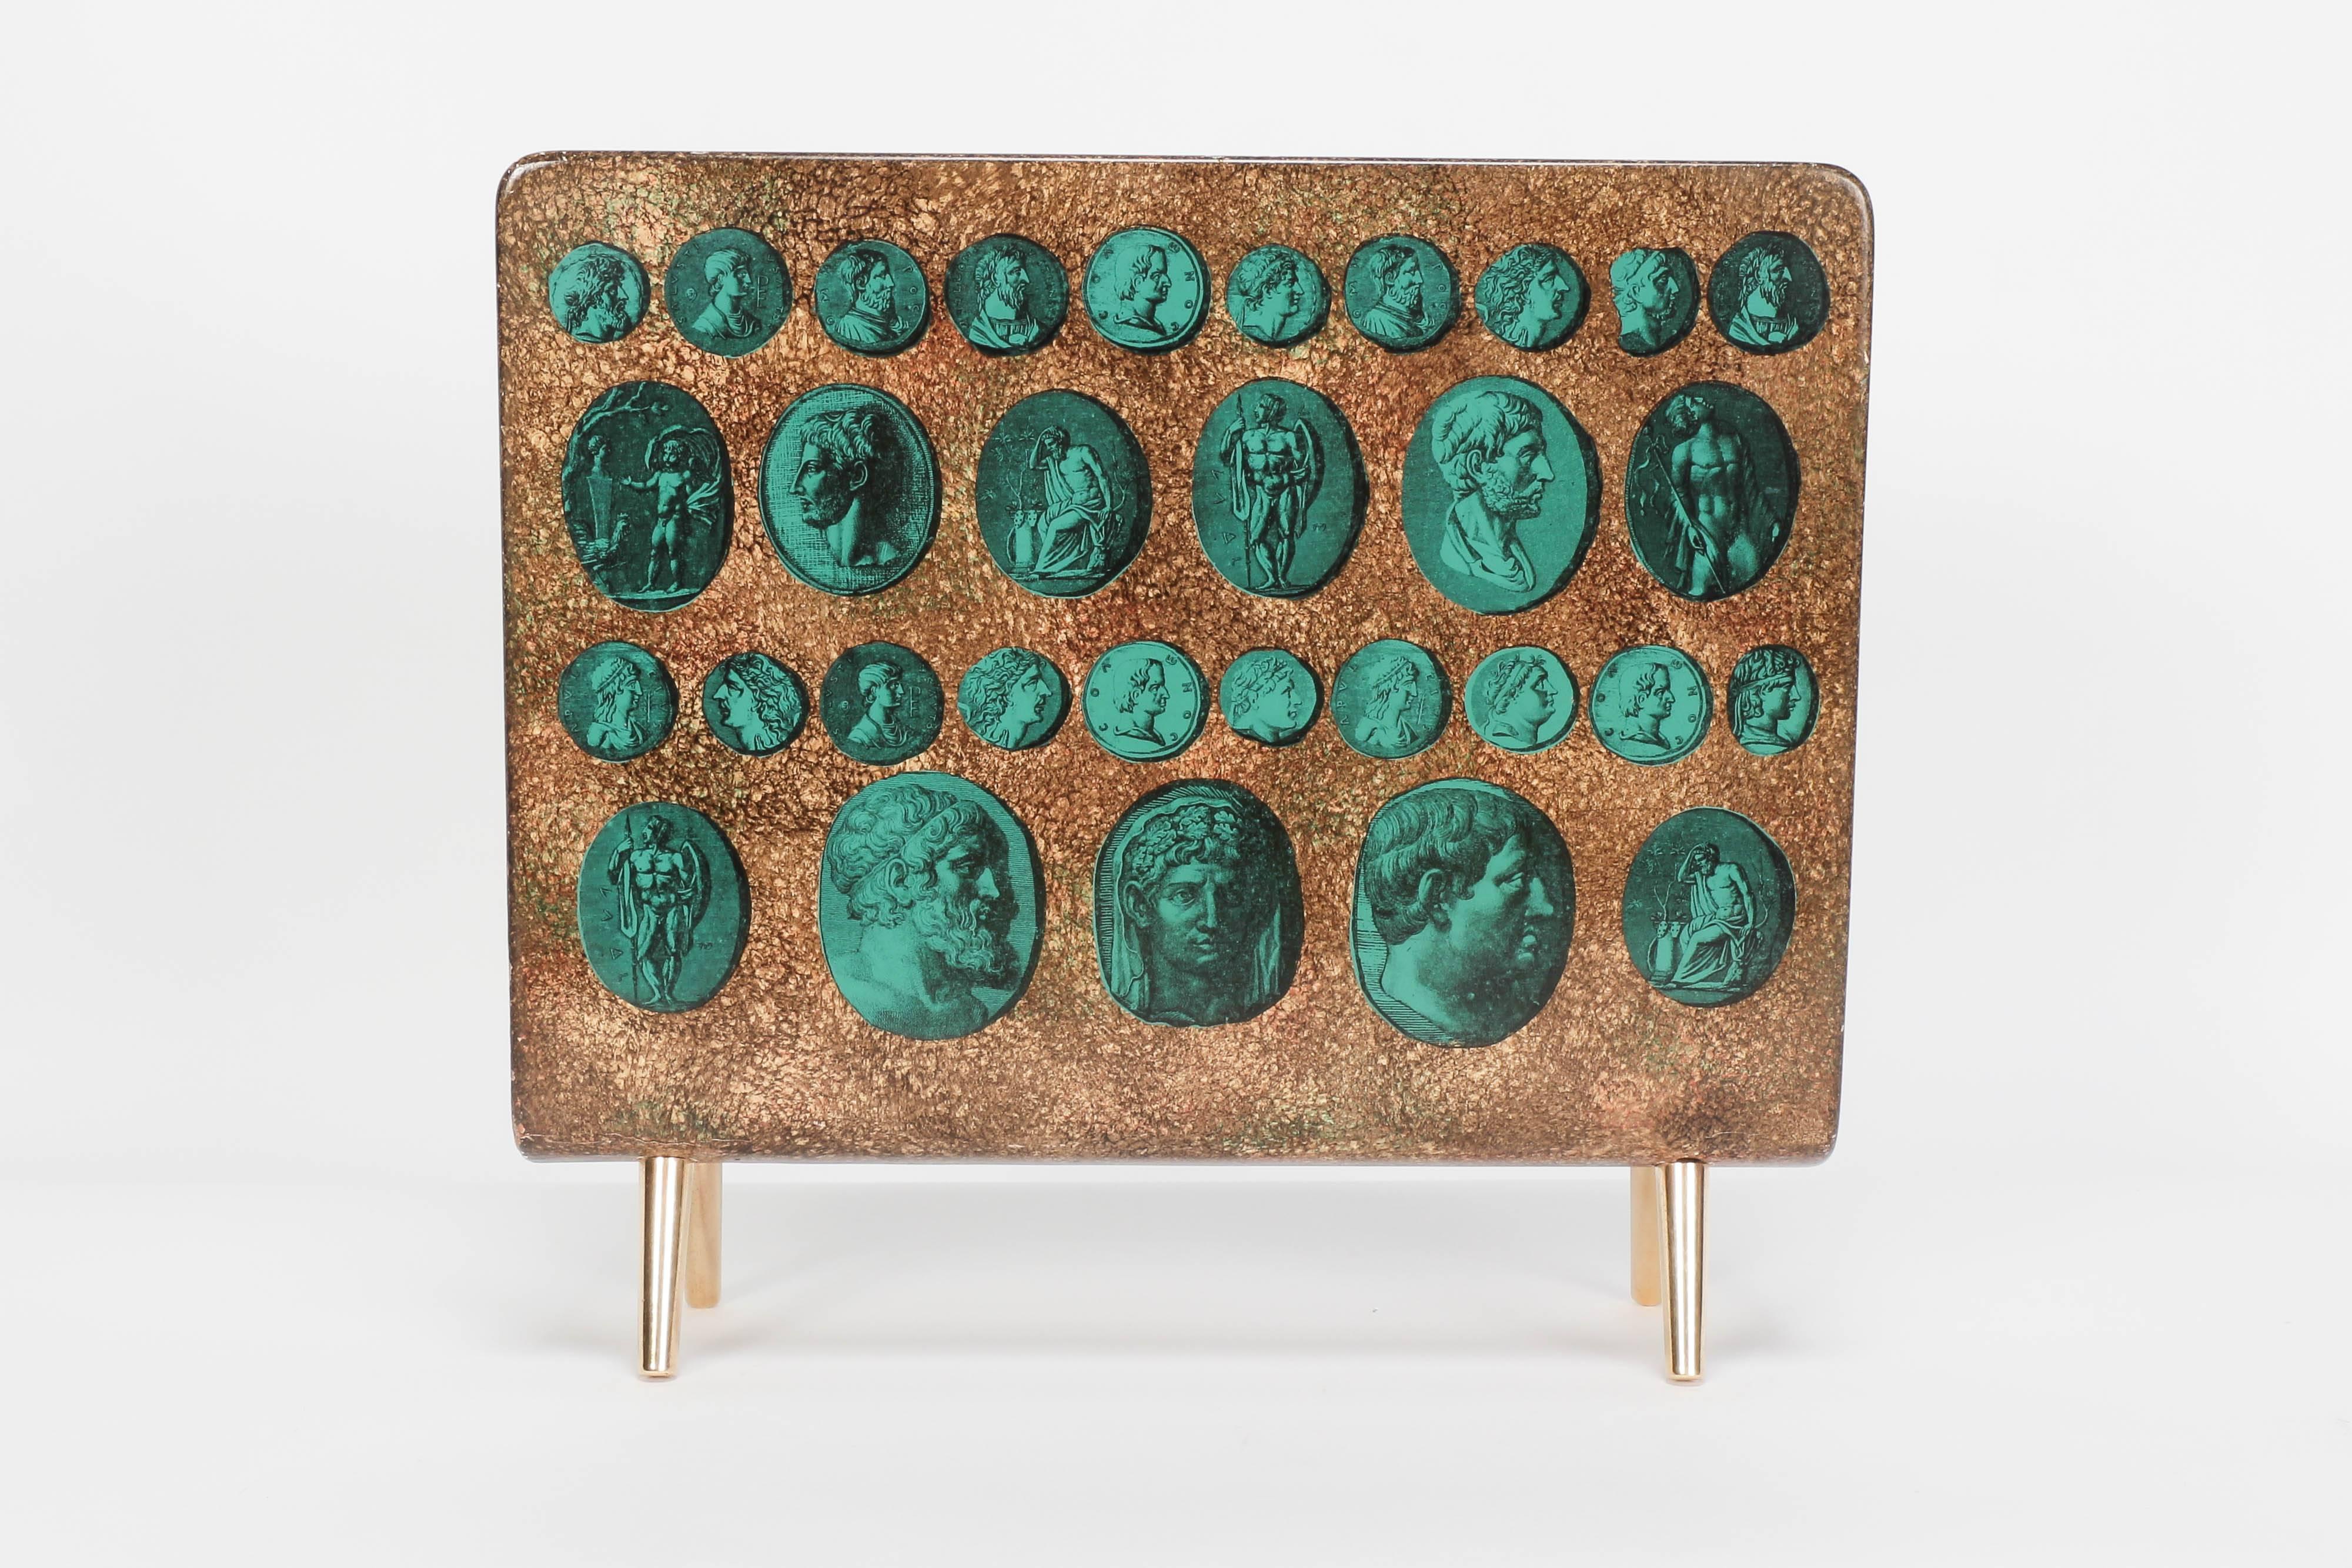 Handcrafted of lacquered wood embellished with a polished brass divider and feet. Fornasetti magazine rack painted with a pattern of antique coins.